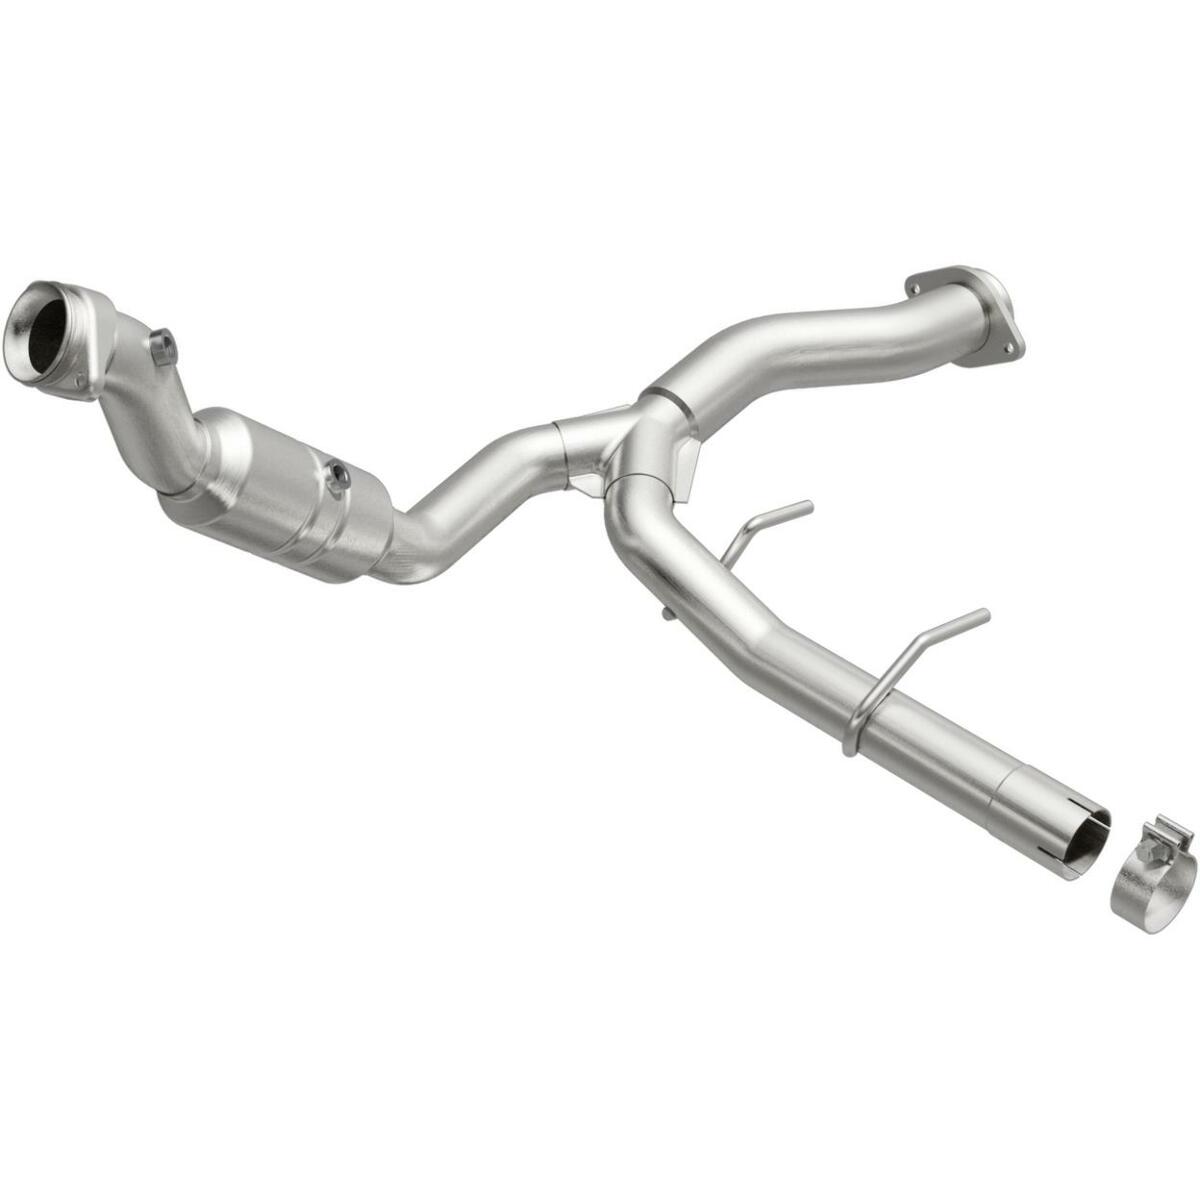 2012-2014 Ford F-150 Direct-Fit Catalytic Converter 5451429 Magnaflow